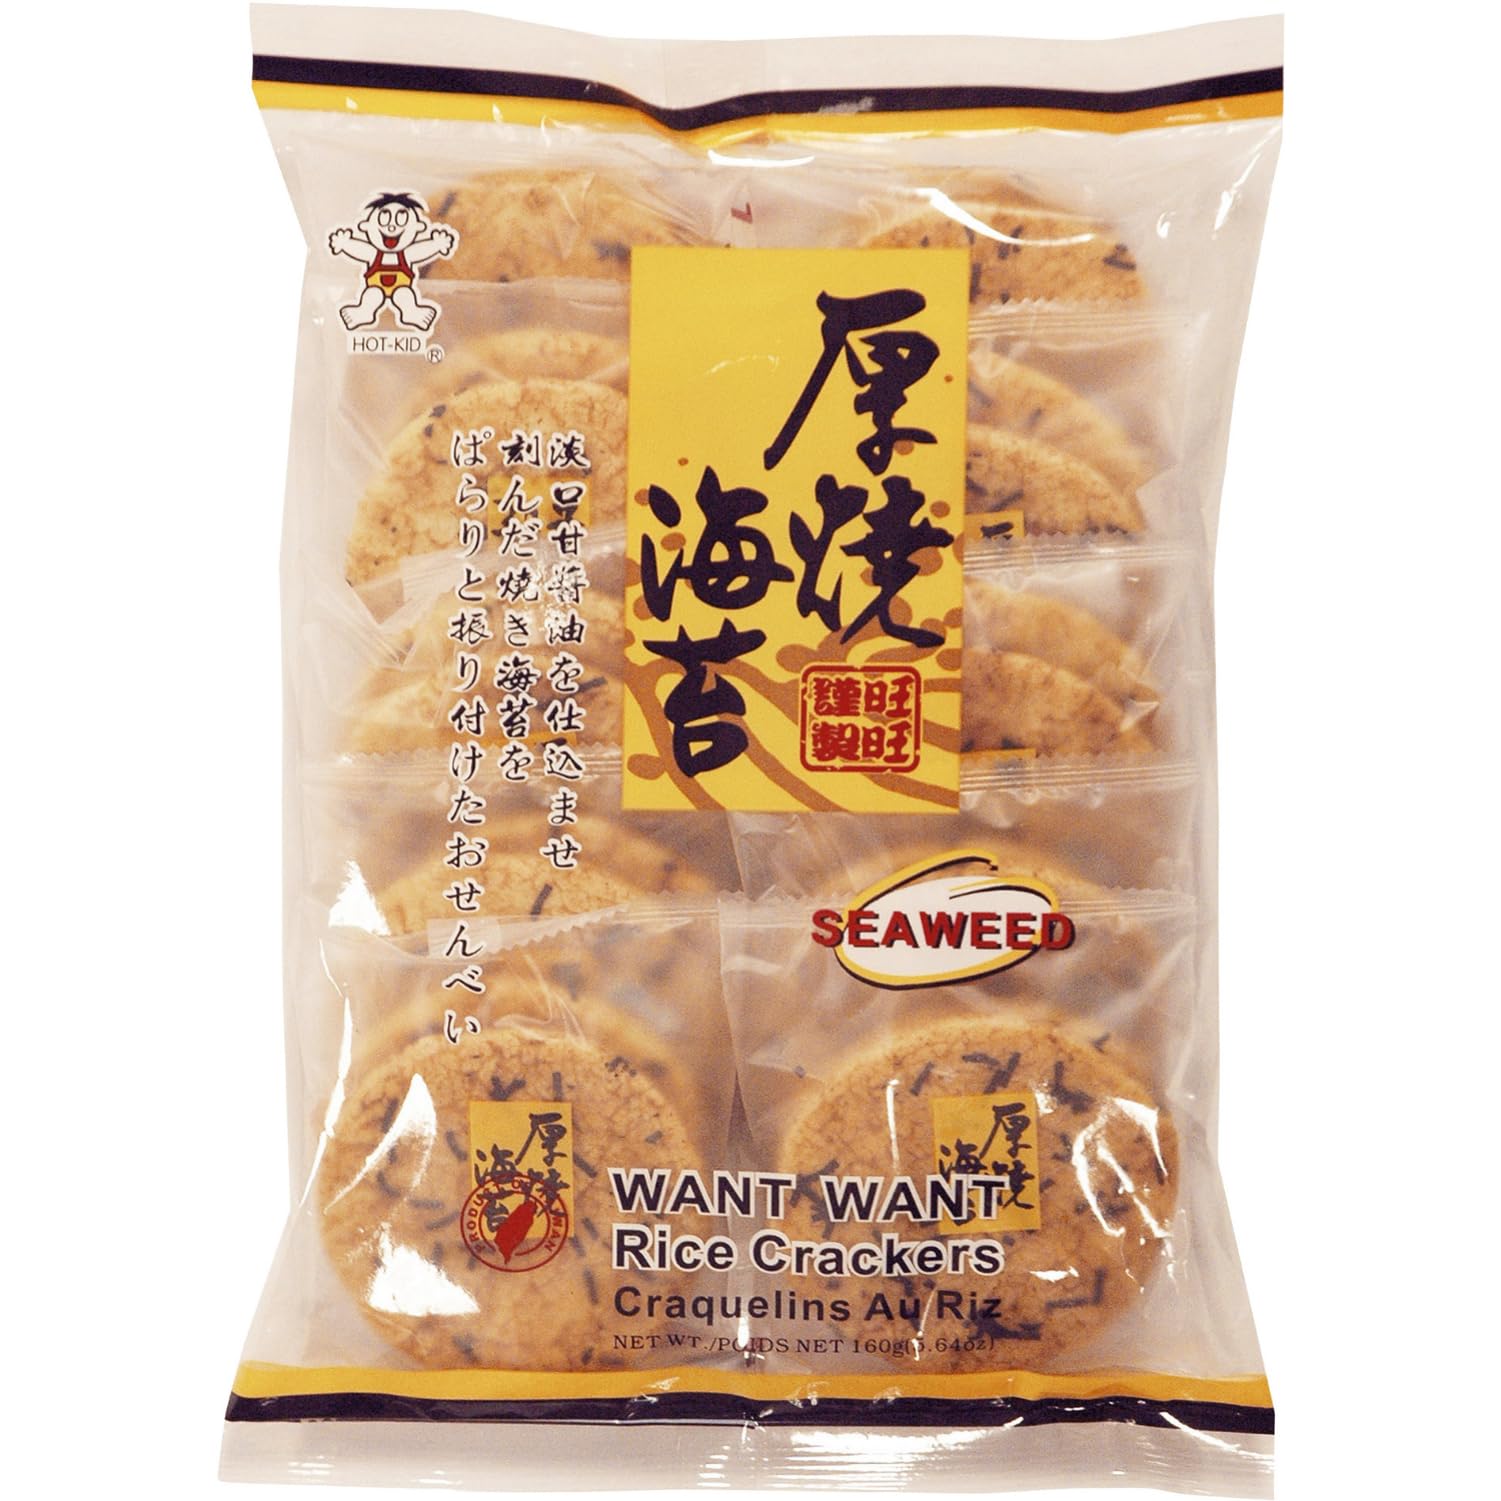 WANT WANT seaweed rice crackers 160g